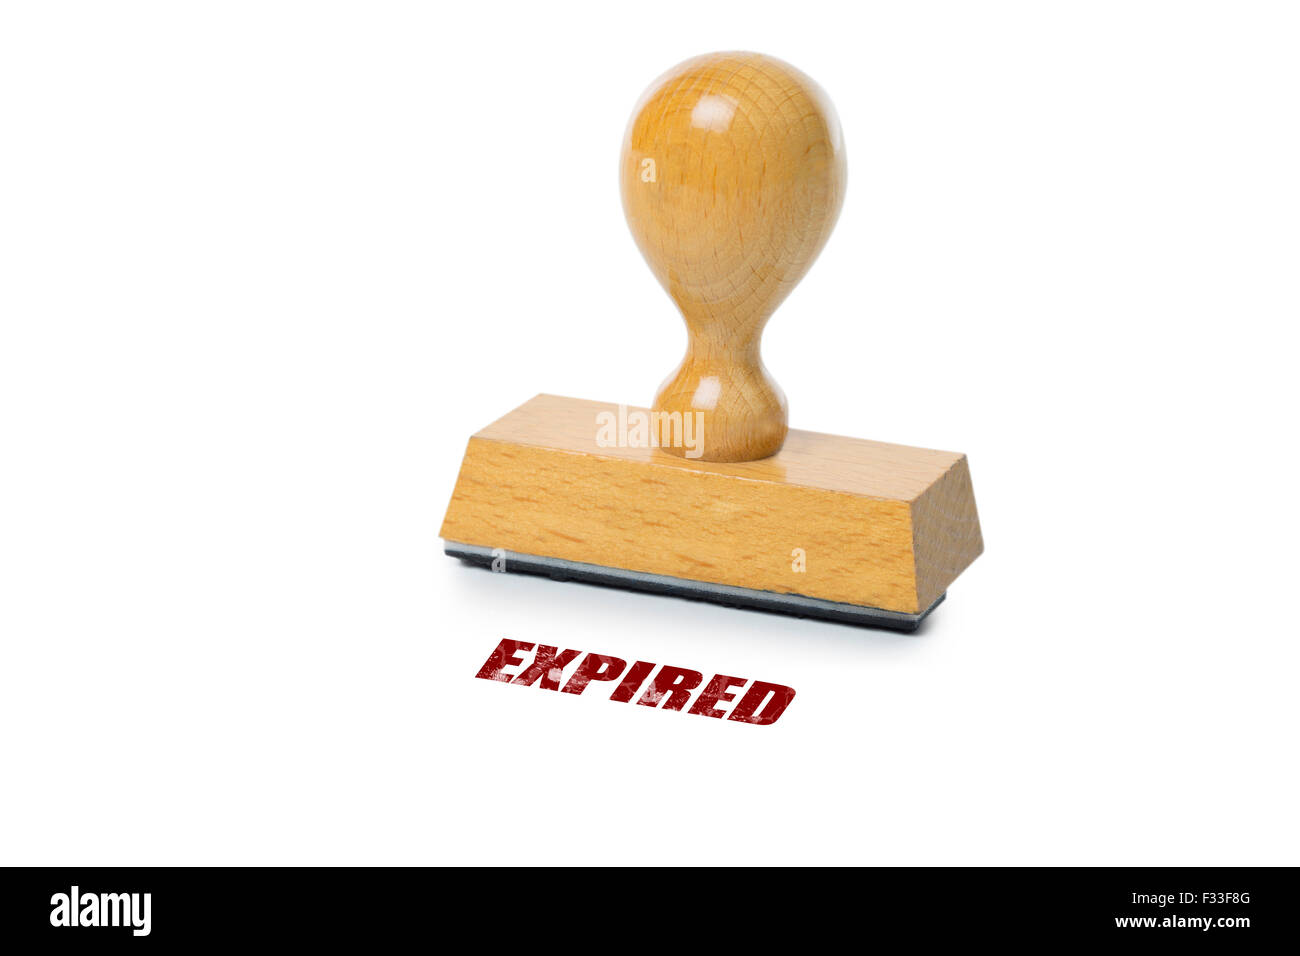 Expired printed in red ink with wooden Rubber stamp isolated on white background Stock Photo